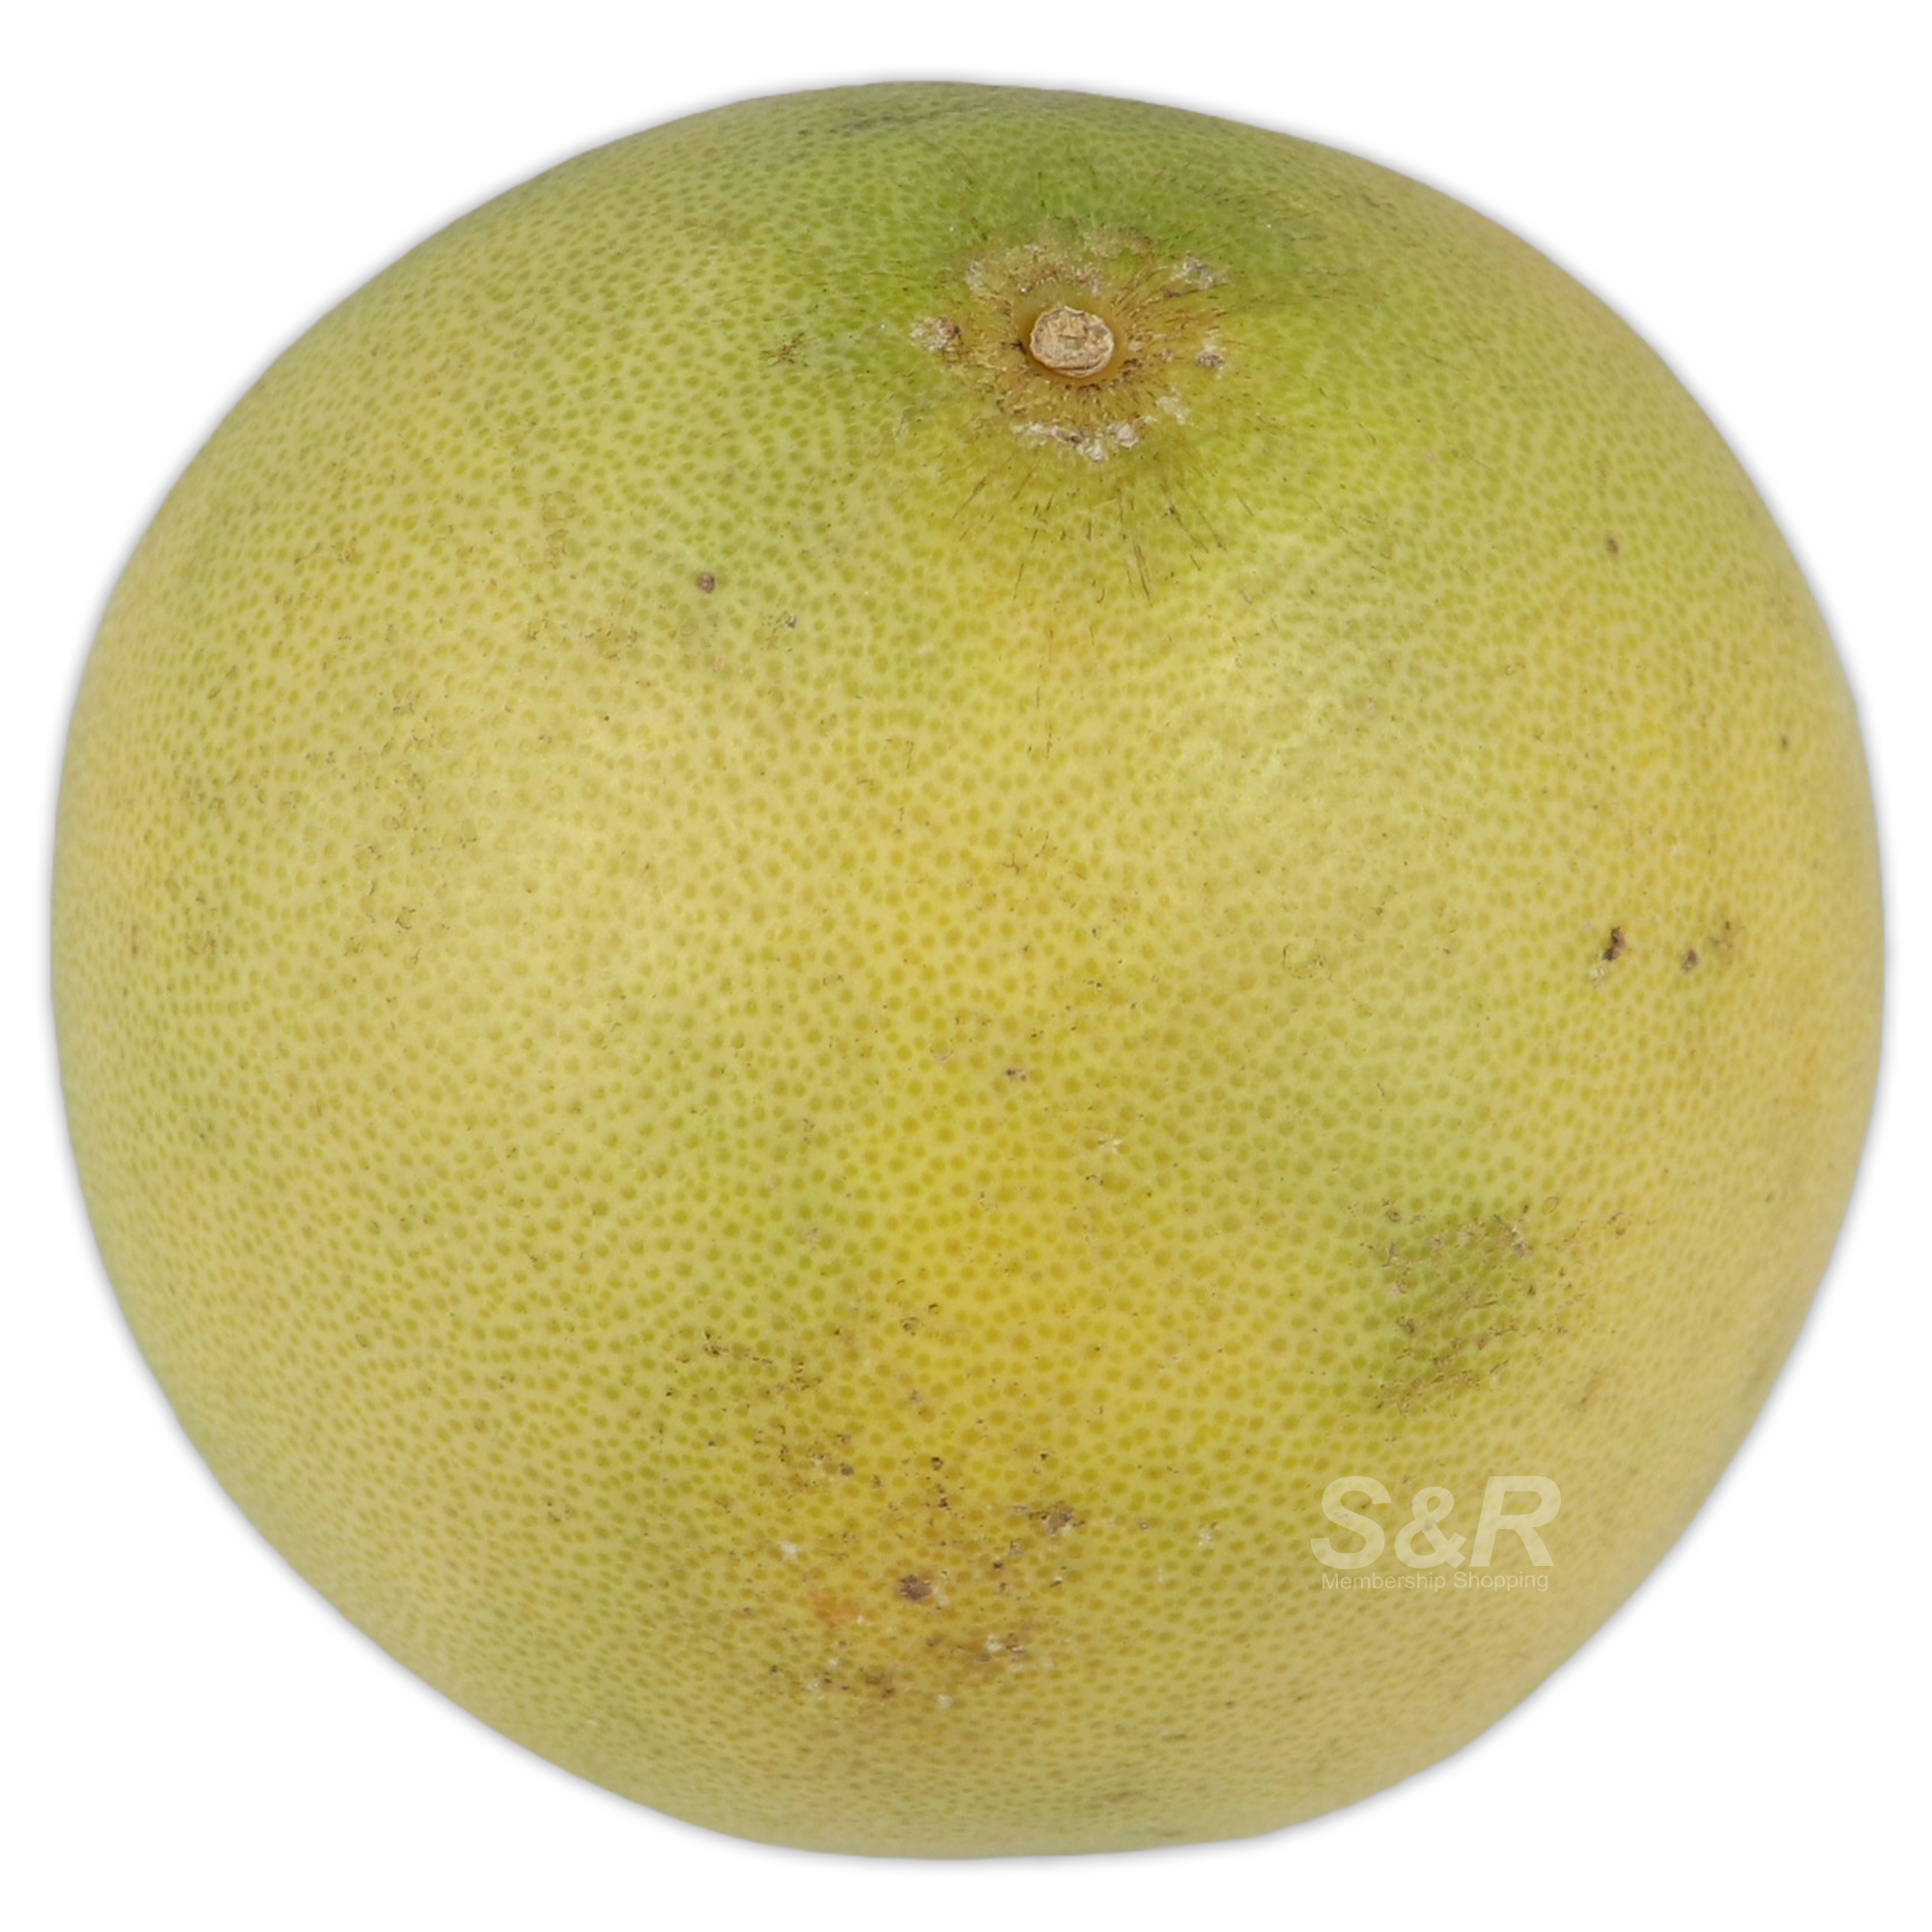 S&R Pomelo approx.1kg